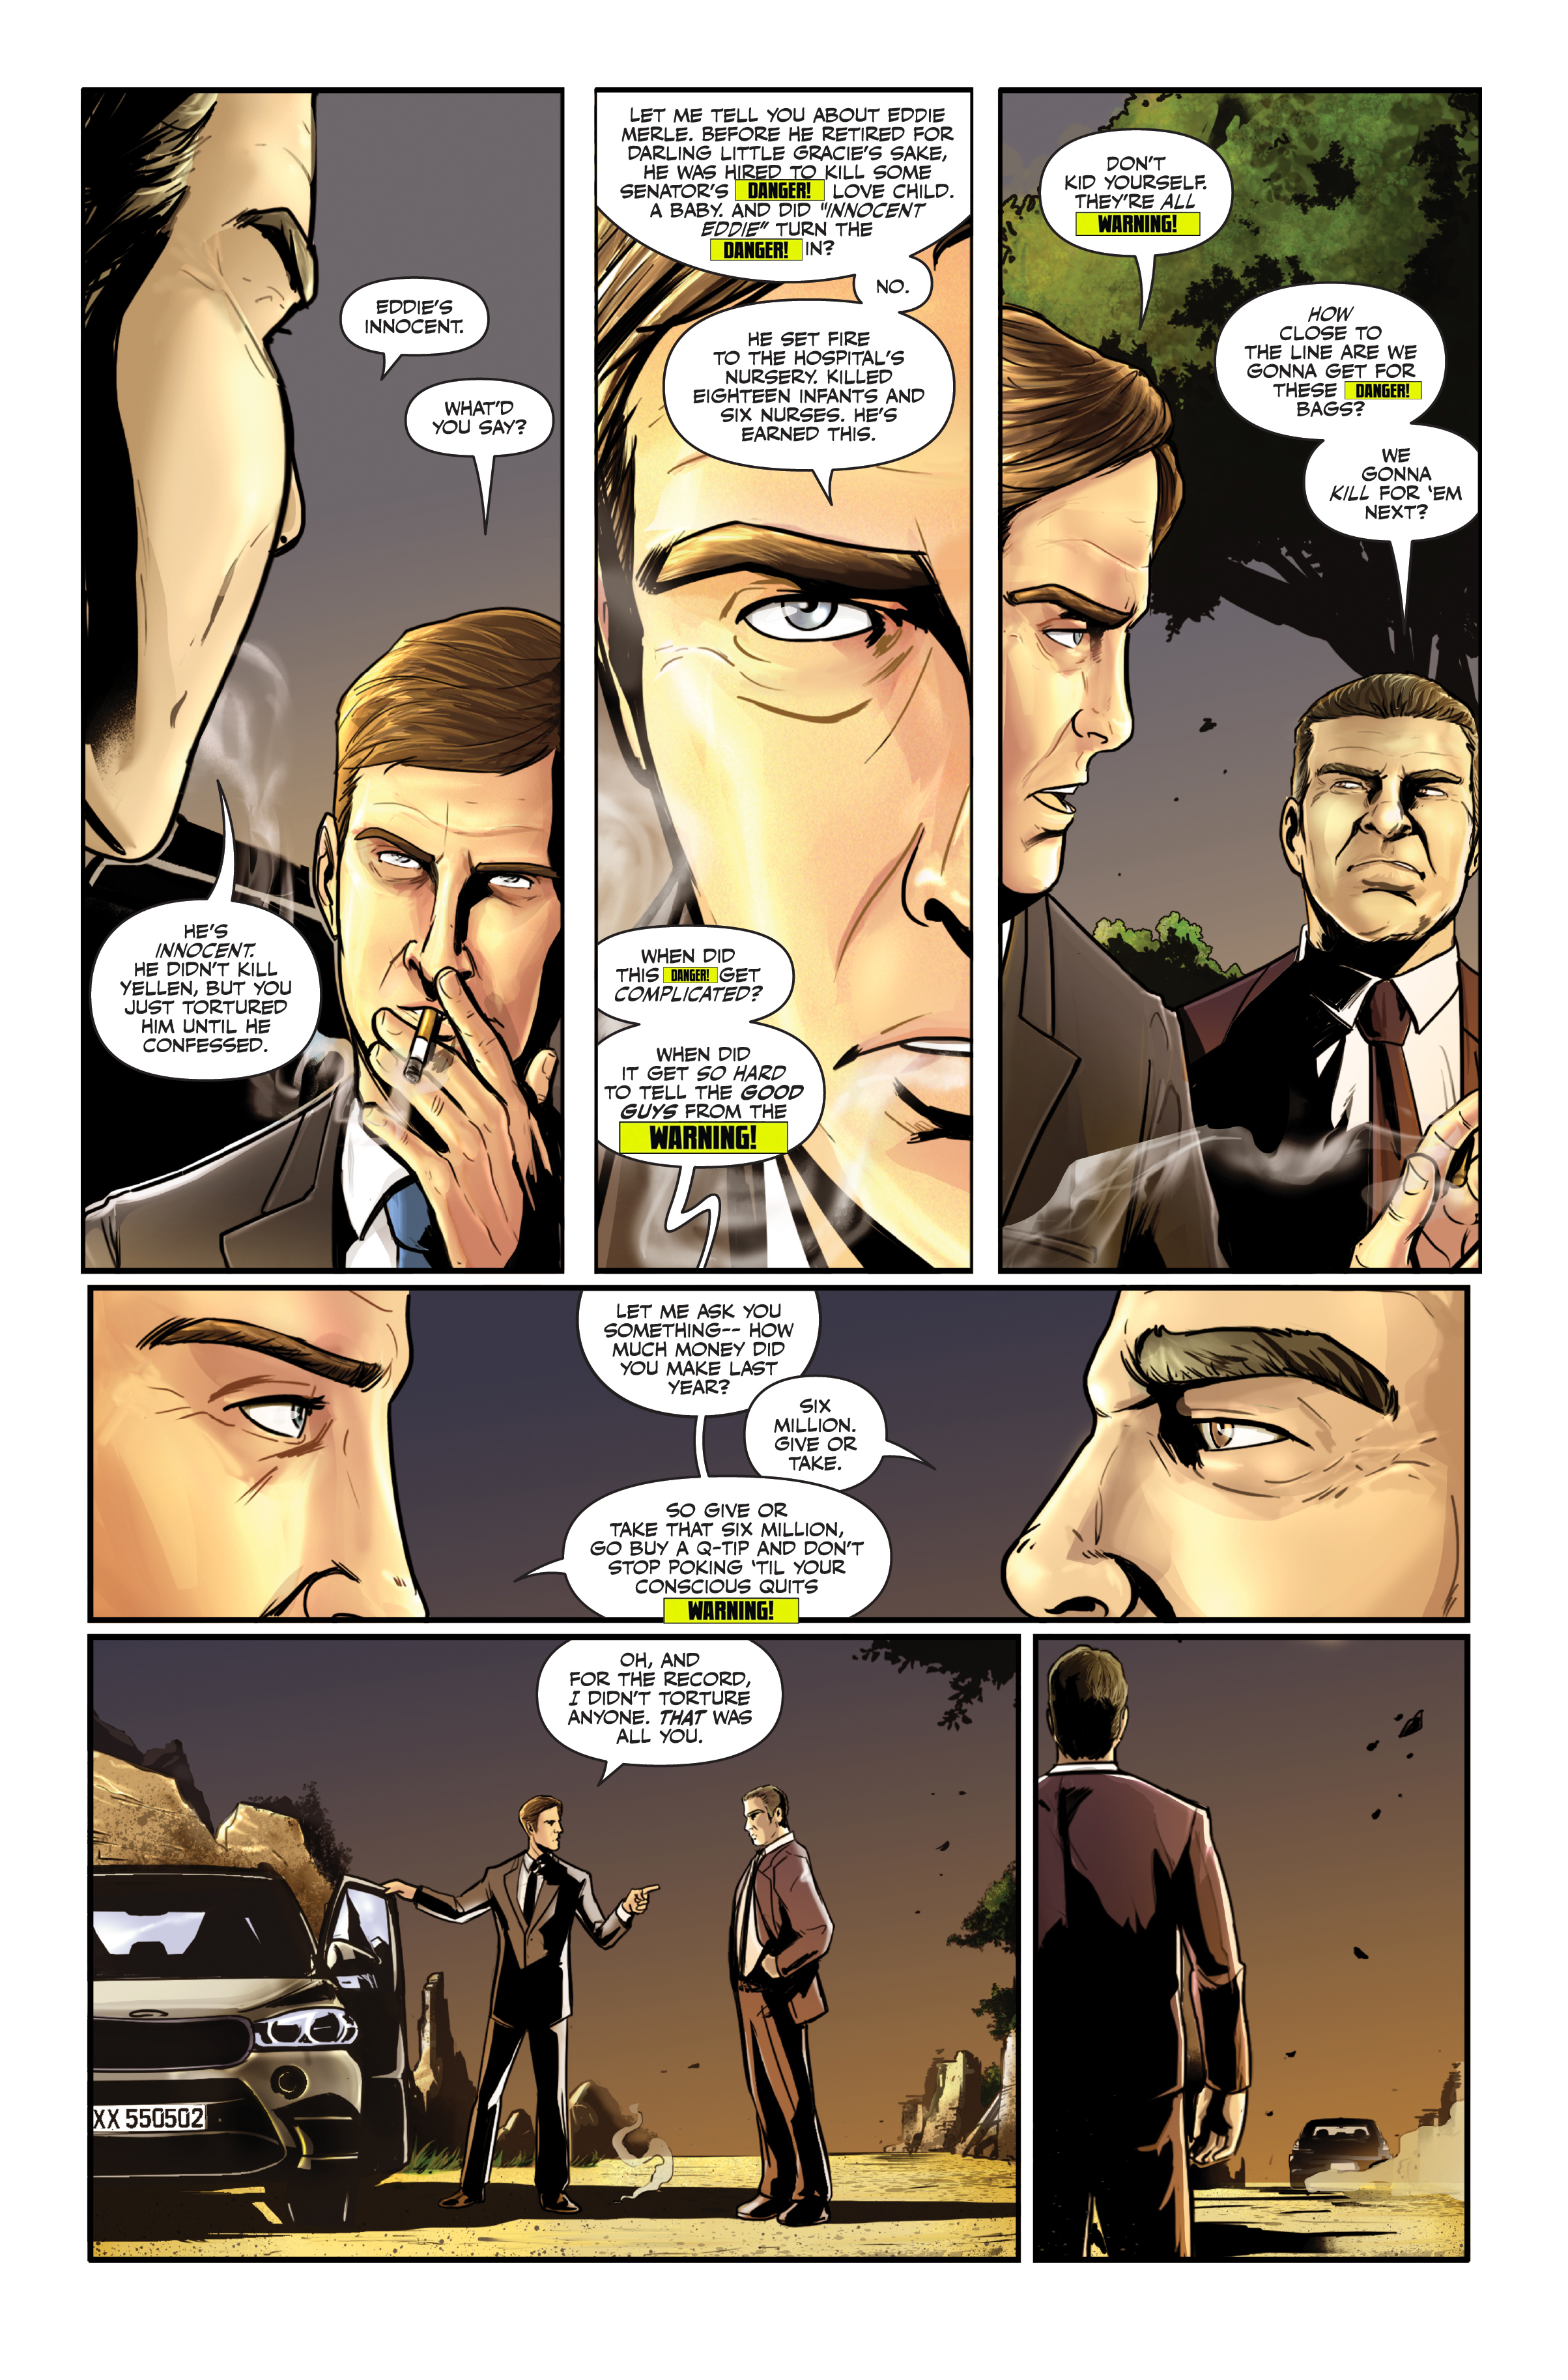 The Consultant #1 Page 5.jpg